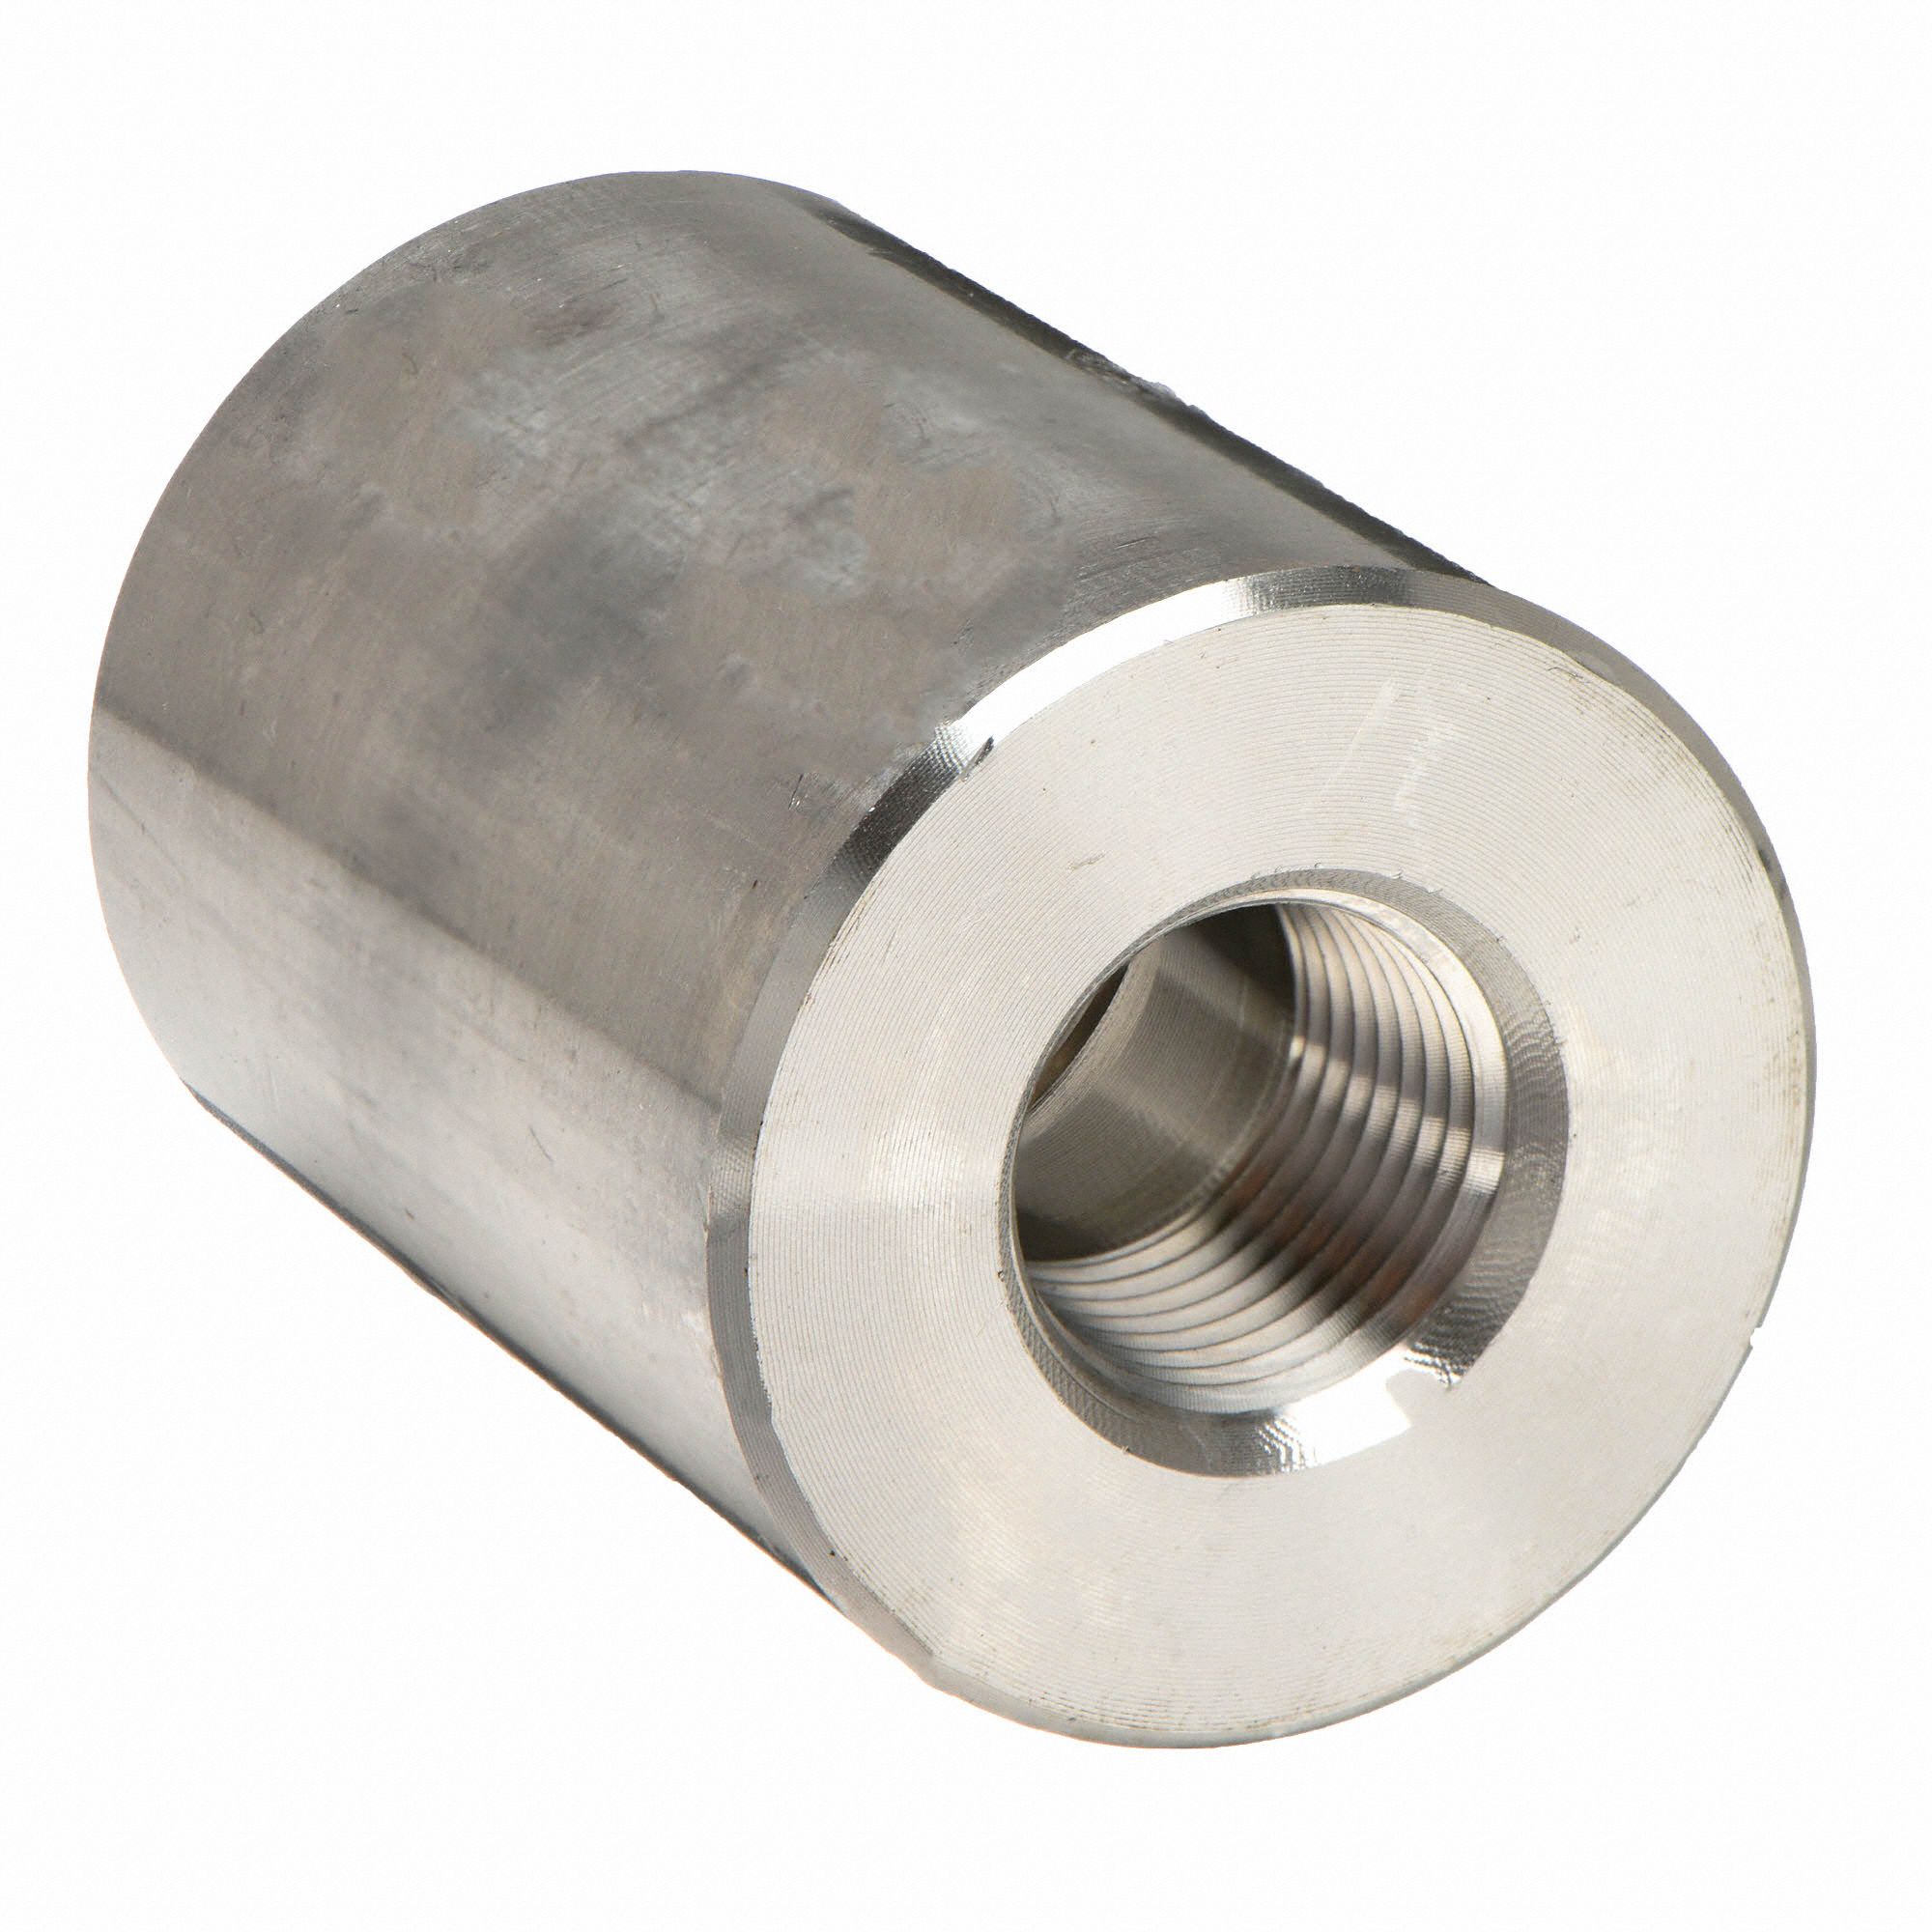 304 SS 1/2" x 1/4" NPT Pipe Thread Reducing Coupling Stainless 150# Coyote Gear